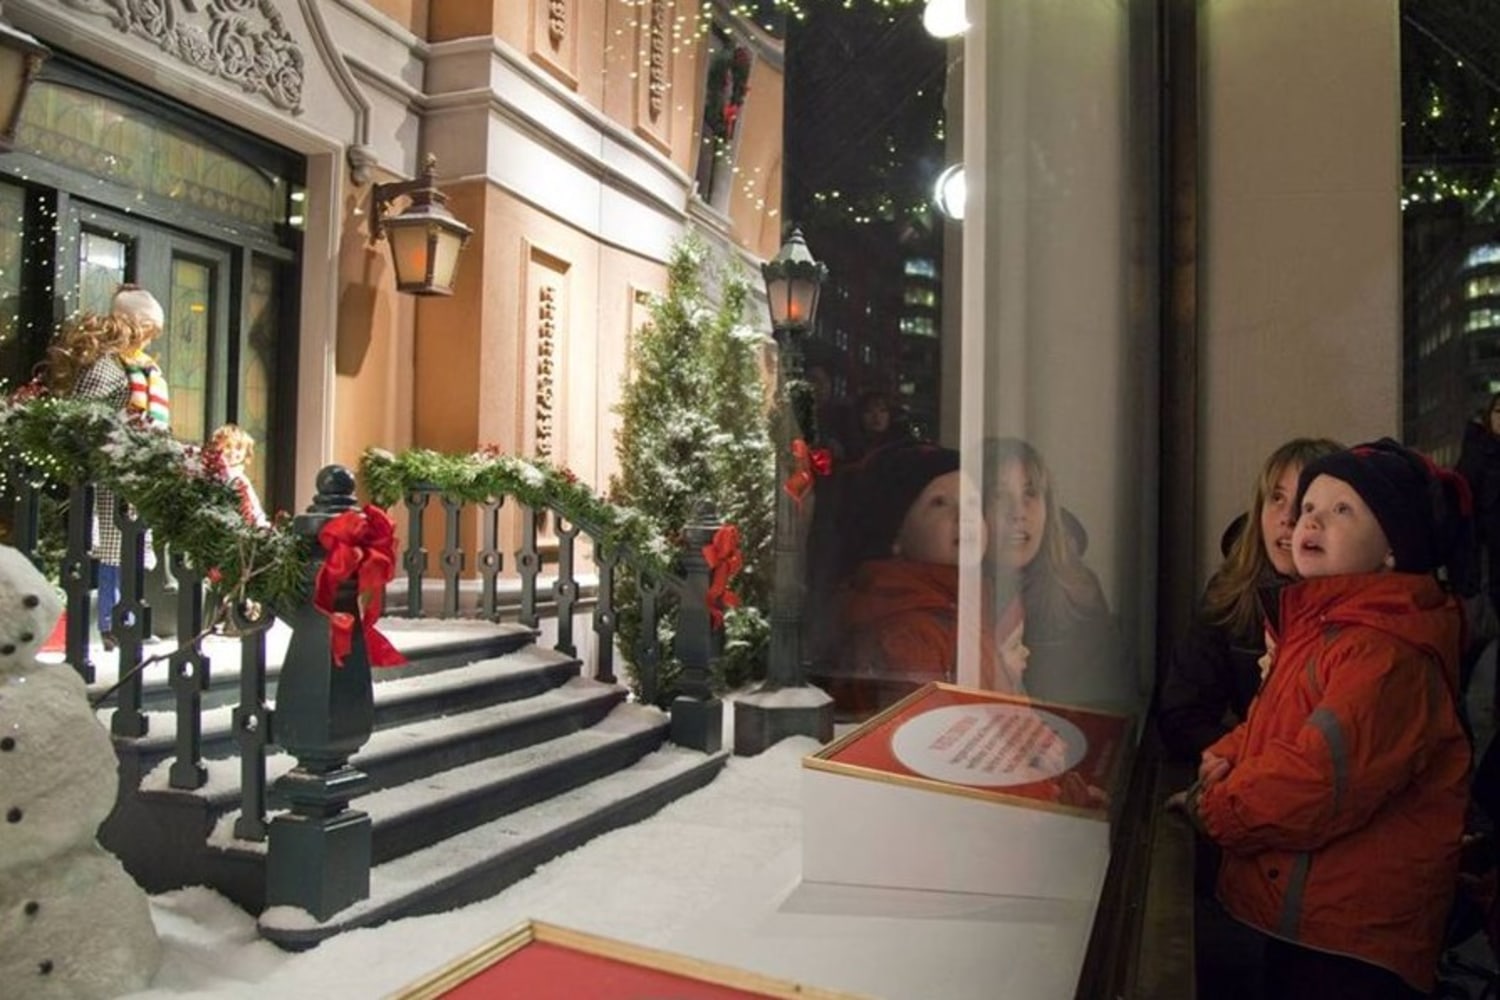 Lord & Taylor's Holiday Window Displays Are Full of Tiny Moving People